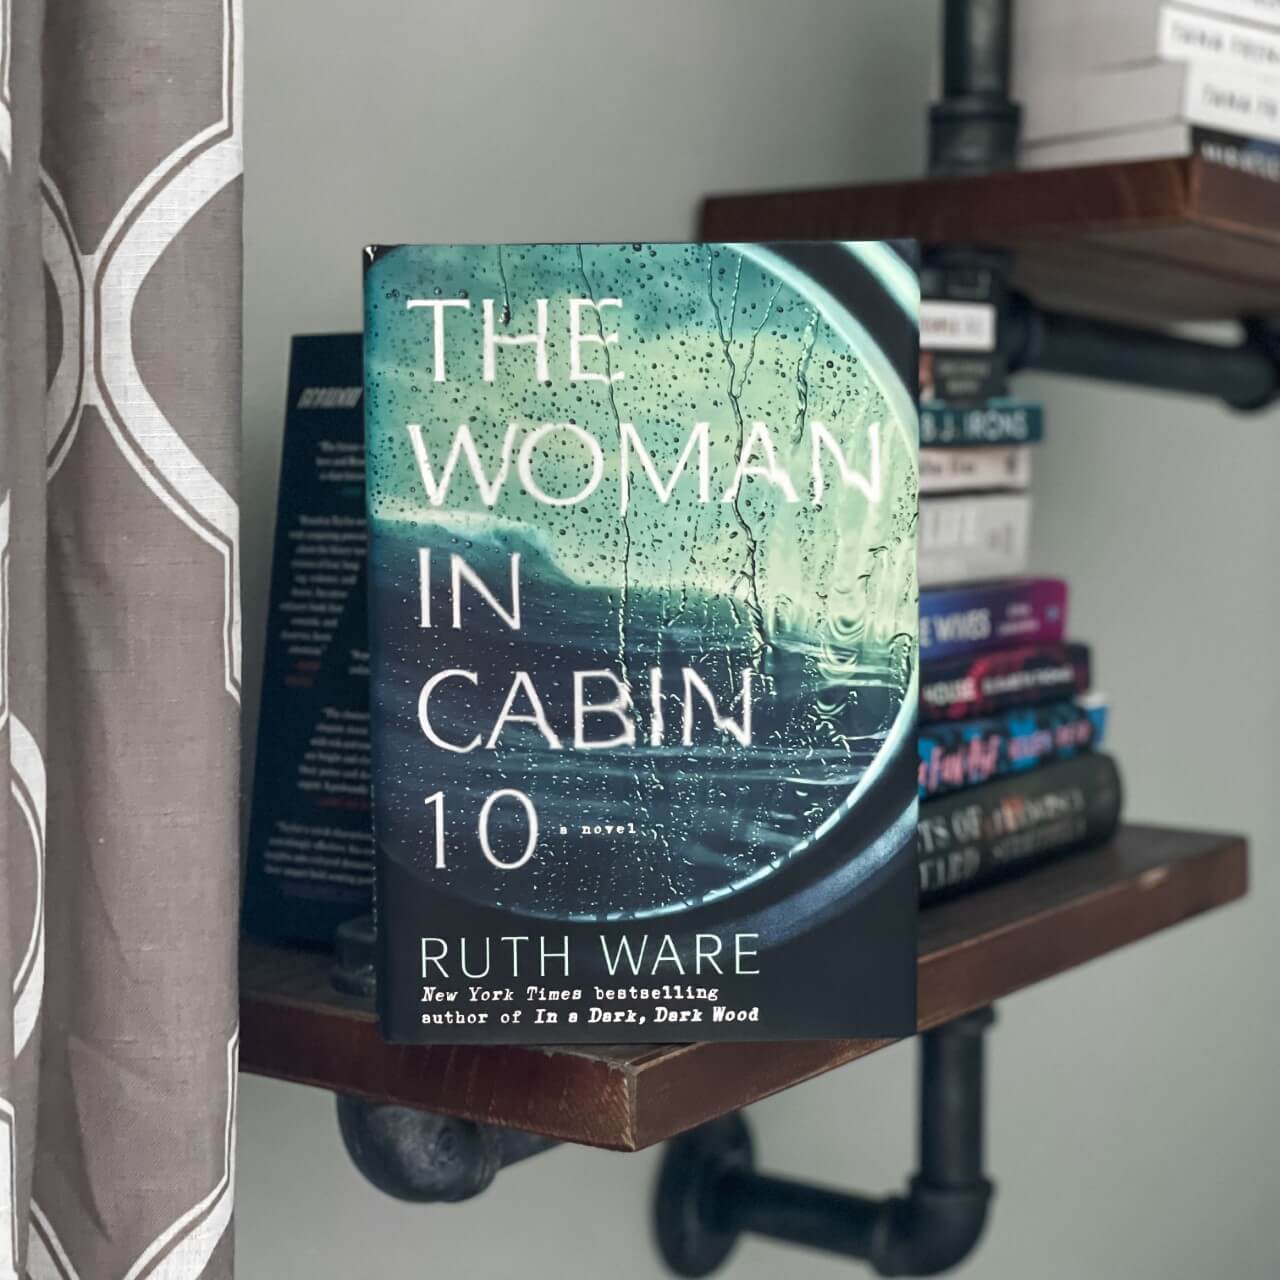 Stylized photo of The Woman in Cabin 10 by Ruth Ware